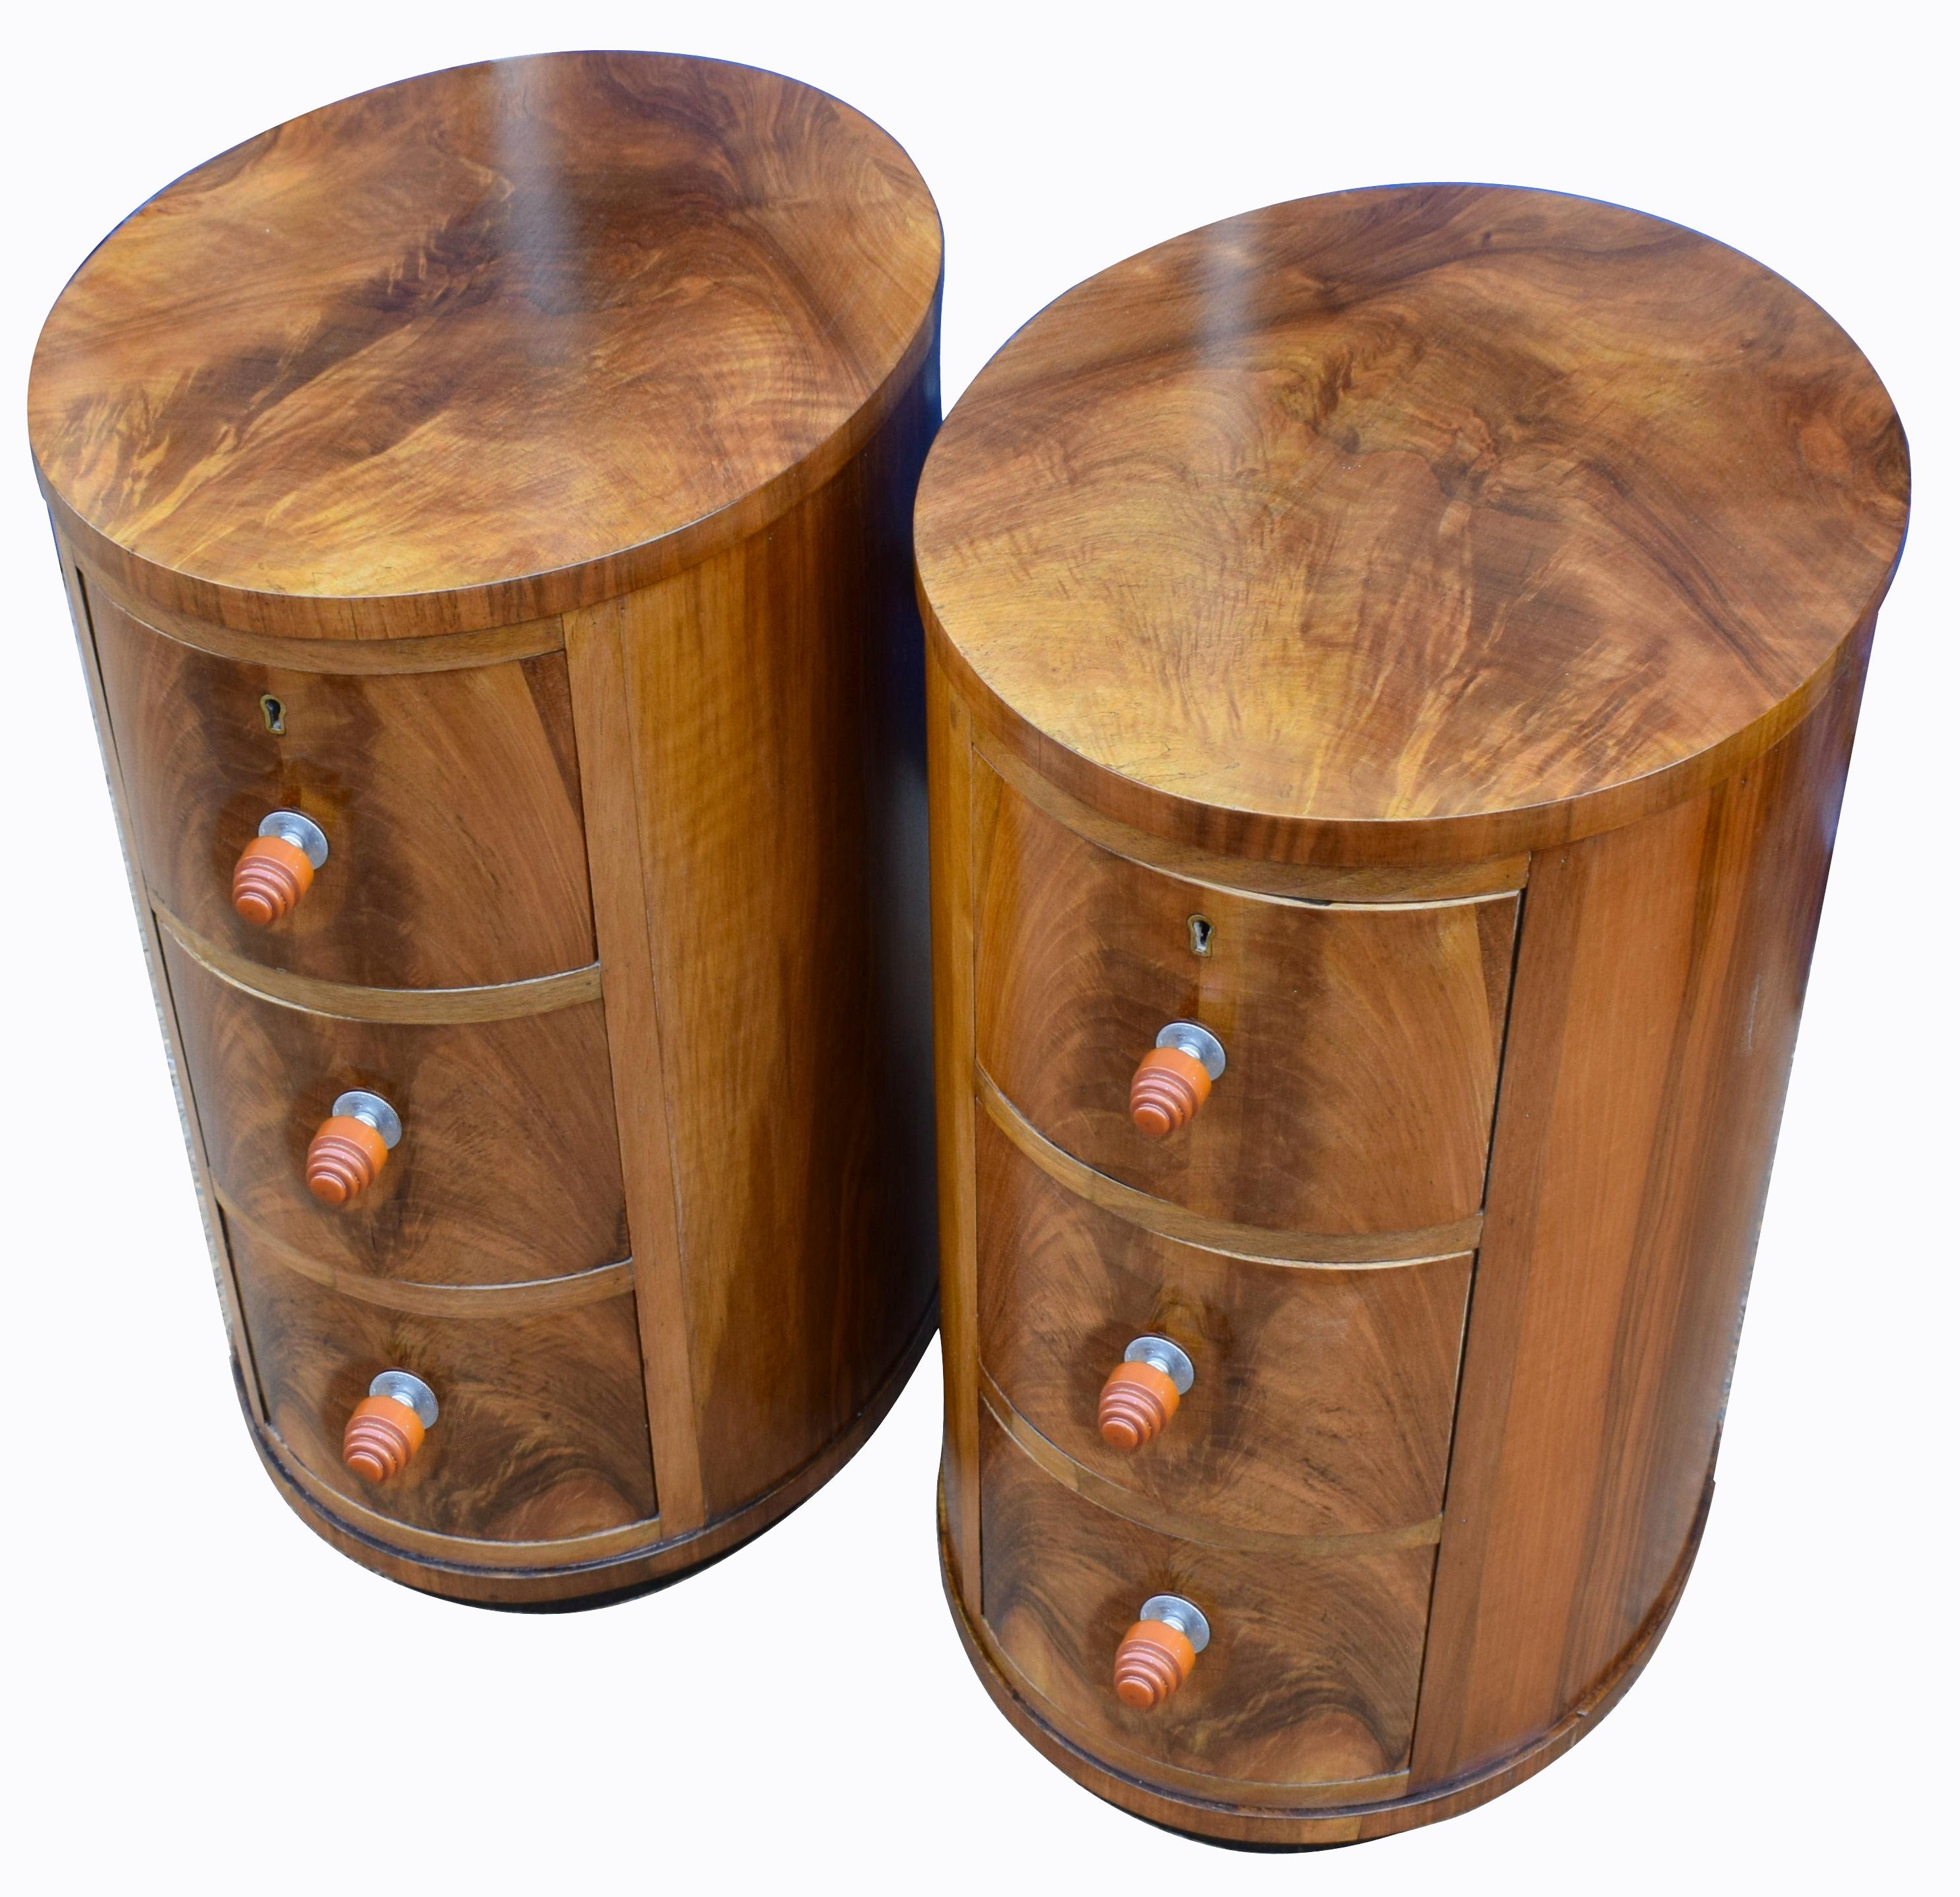 For your consideration are these fabulous matching pair of Art Deco oval bedside cabinet tables, dating to the 1930s. For those less well versed in Art Deco could be forgiven in thinking these cabinets were modern such is the styling which is as